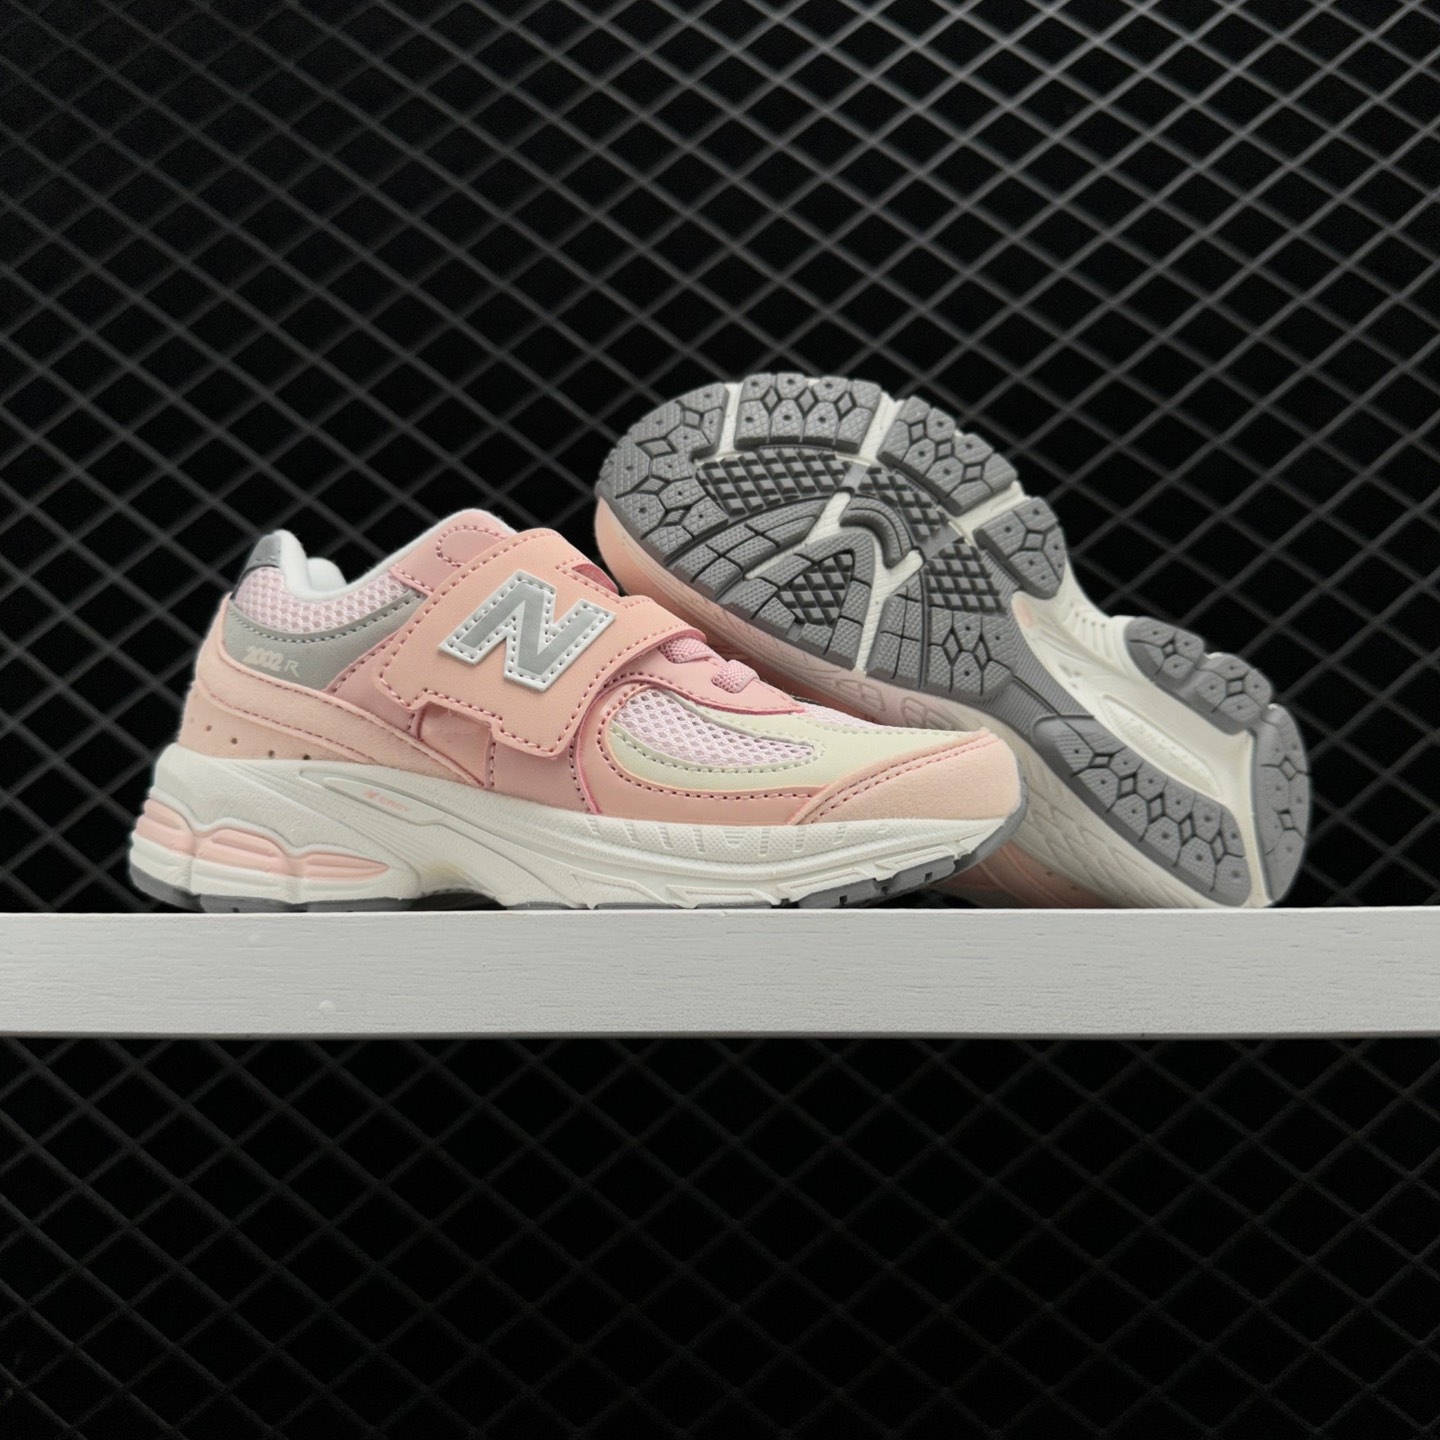 New Balance 2002R Kids Sneaker Pink White - Stylish and Comfortable Footwear!